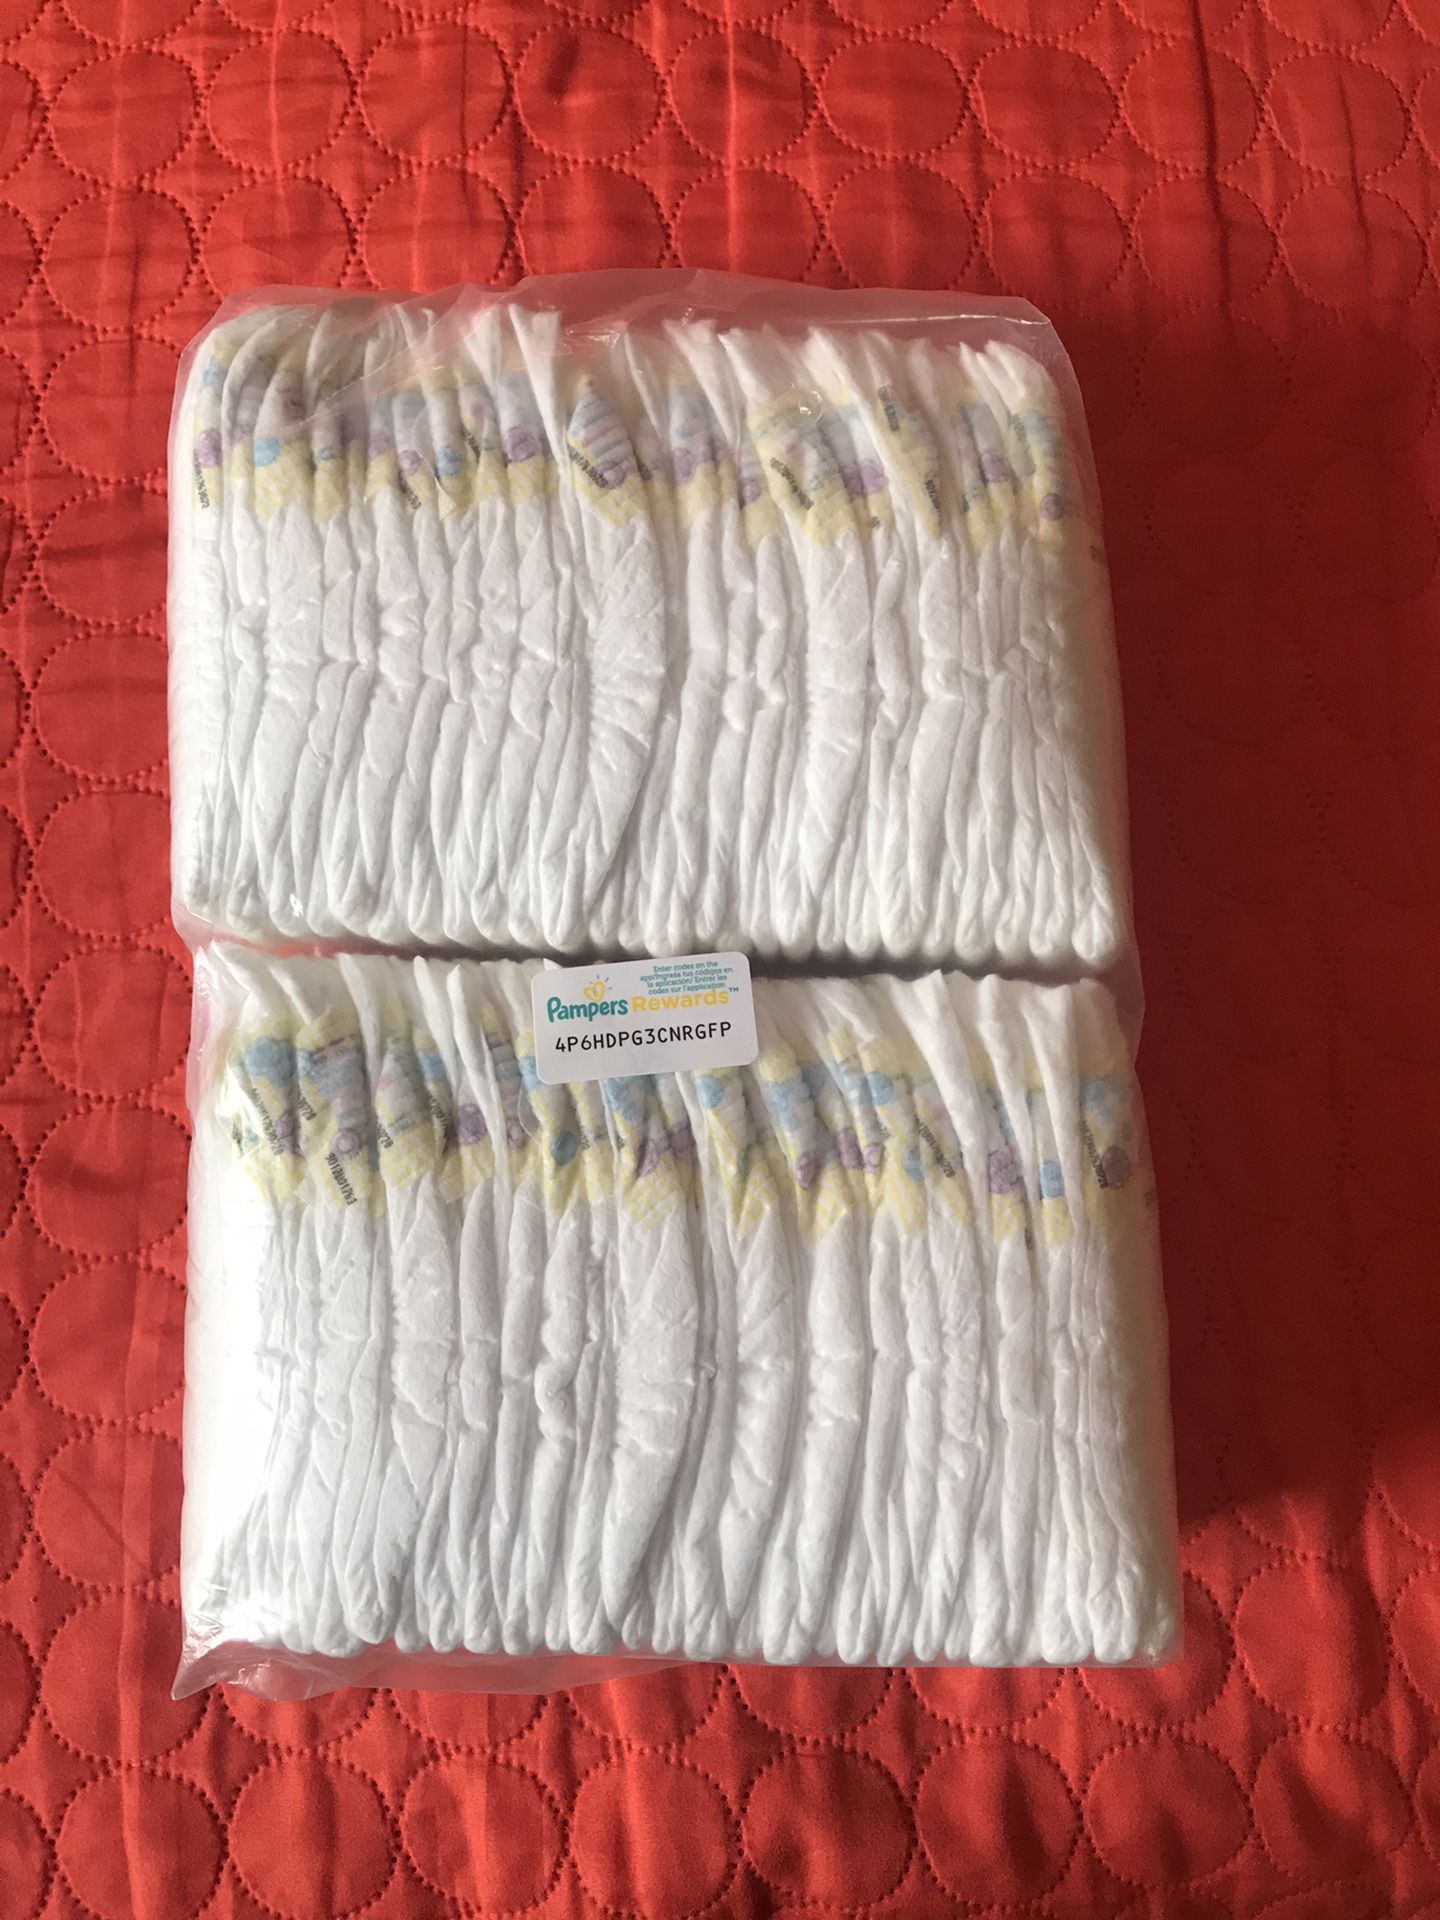 Diapers $5